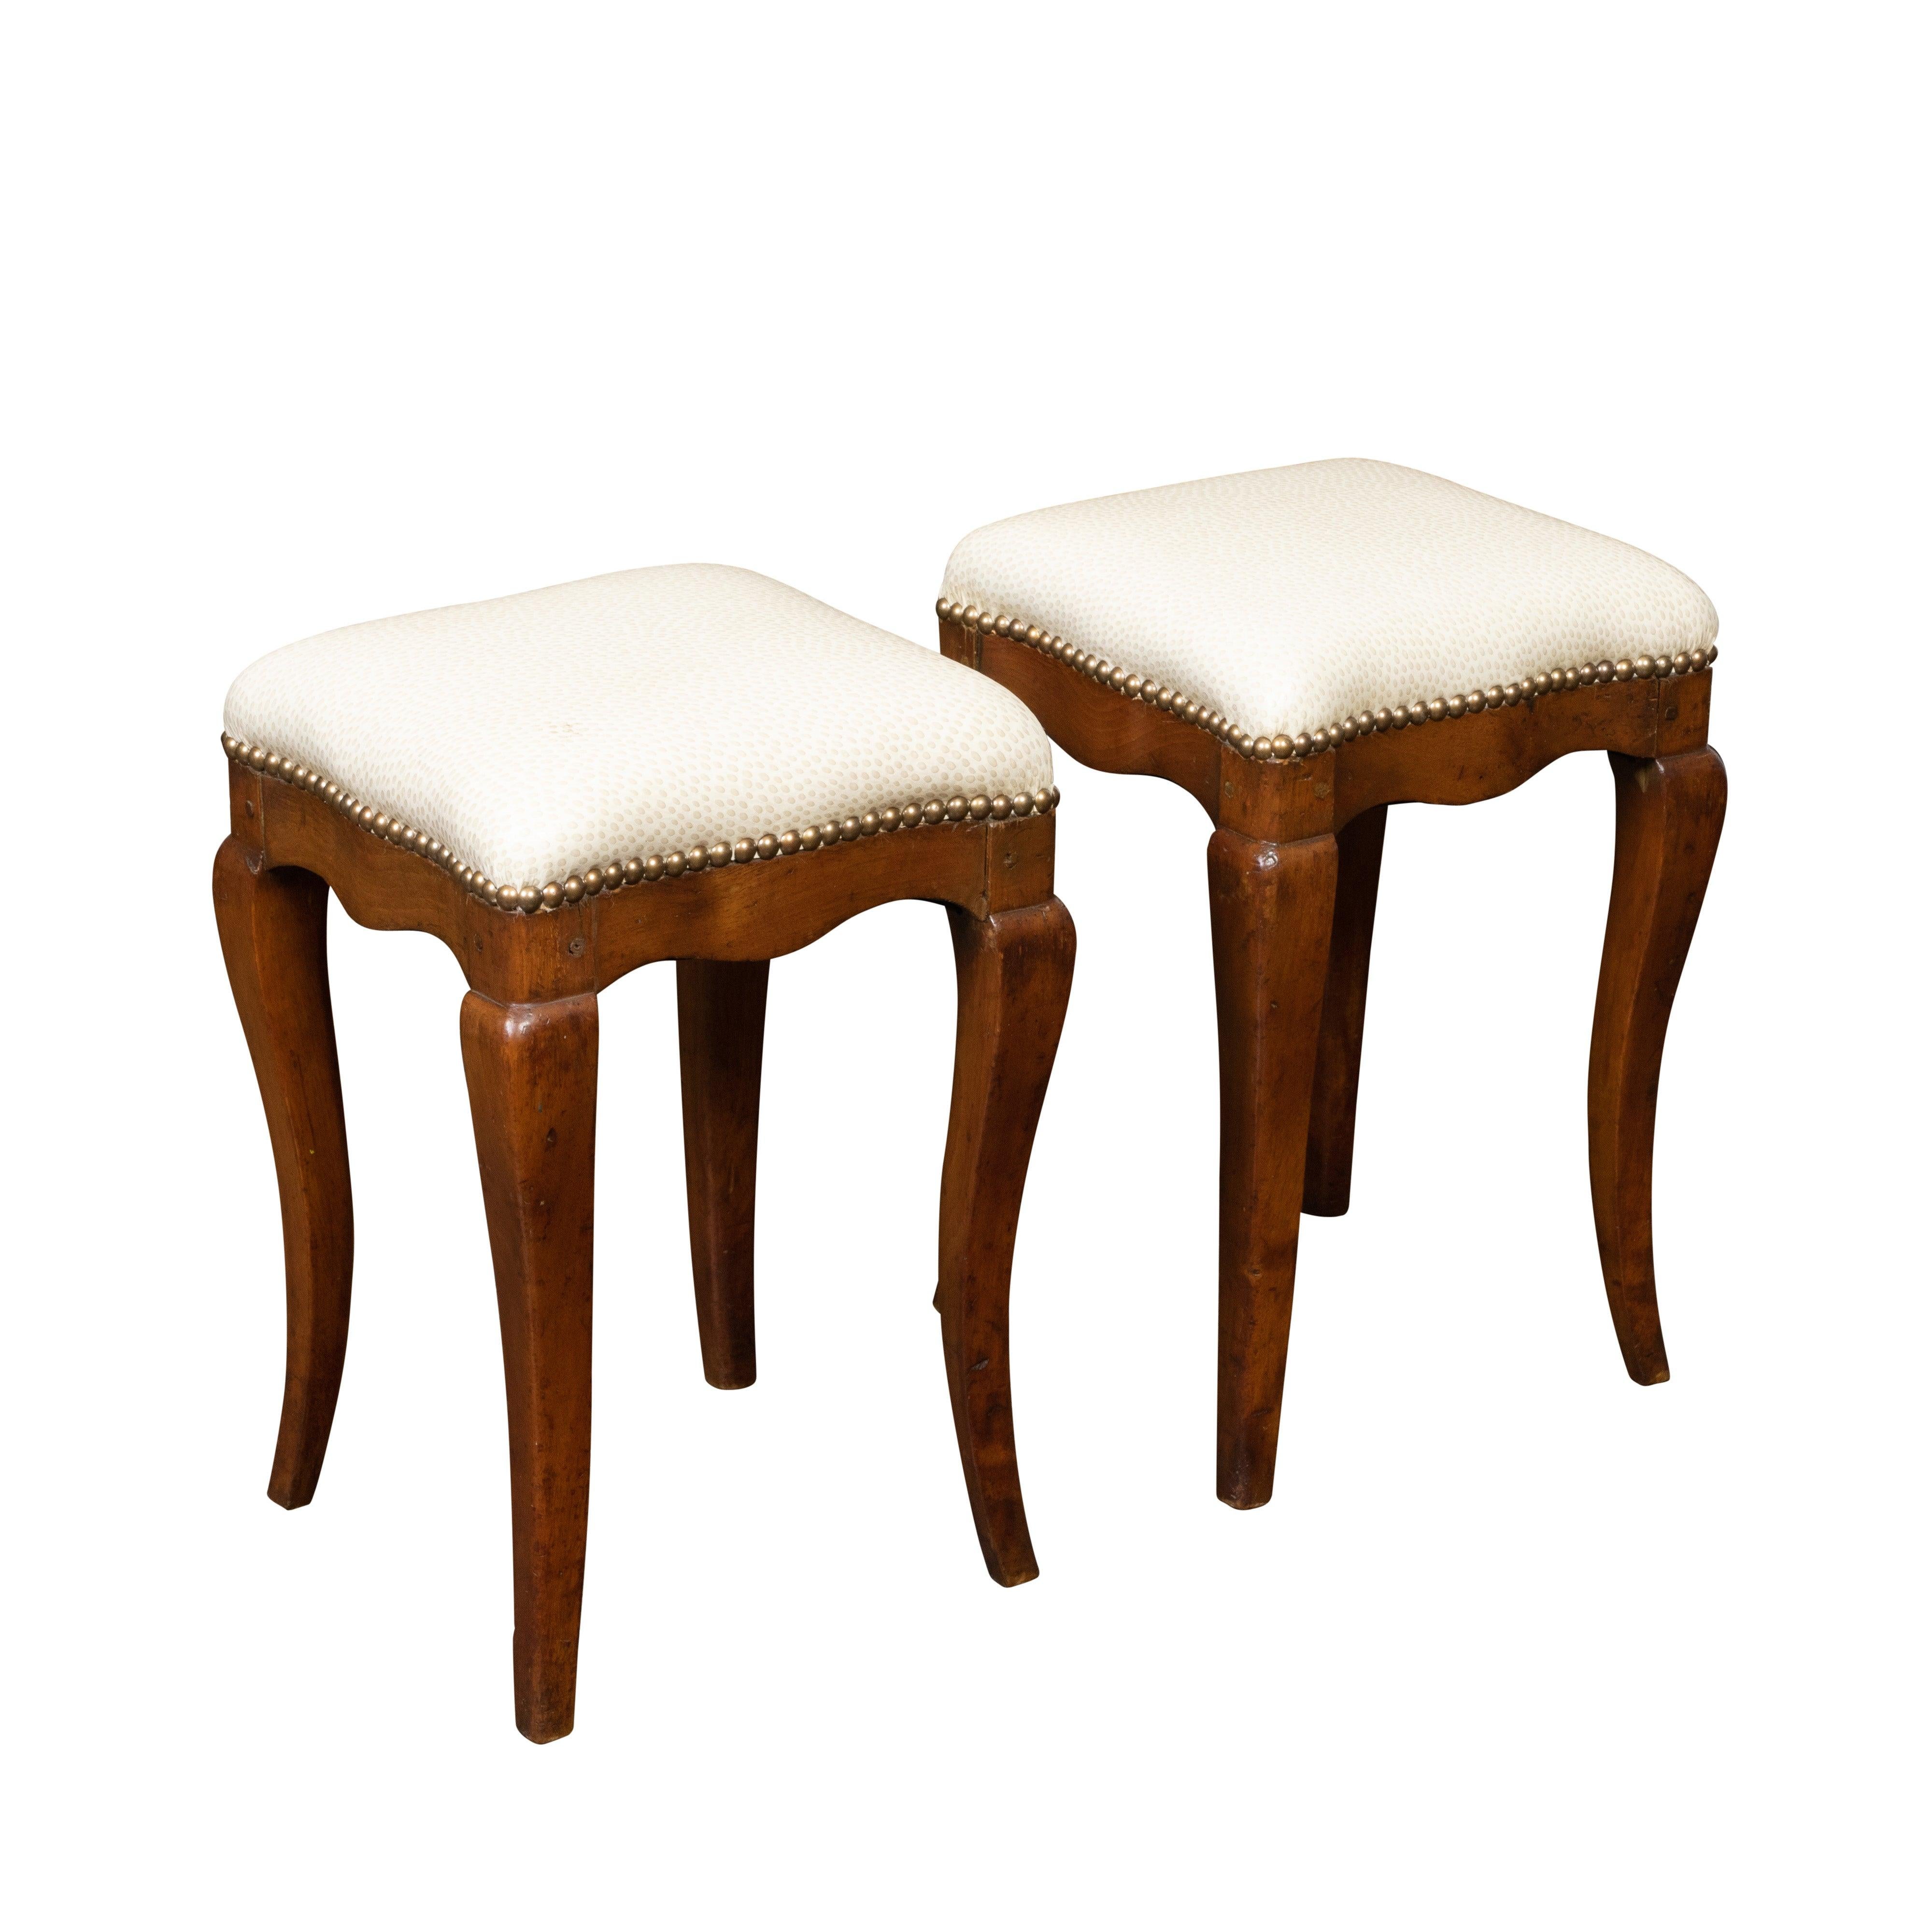 Pair of 19th Century Italian Walnut Stools with Cabriole Legs and New Upholstery For Sale